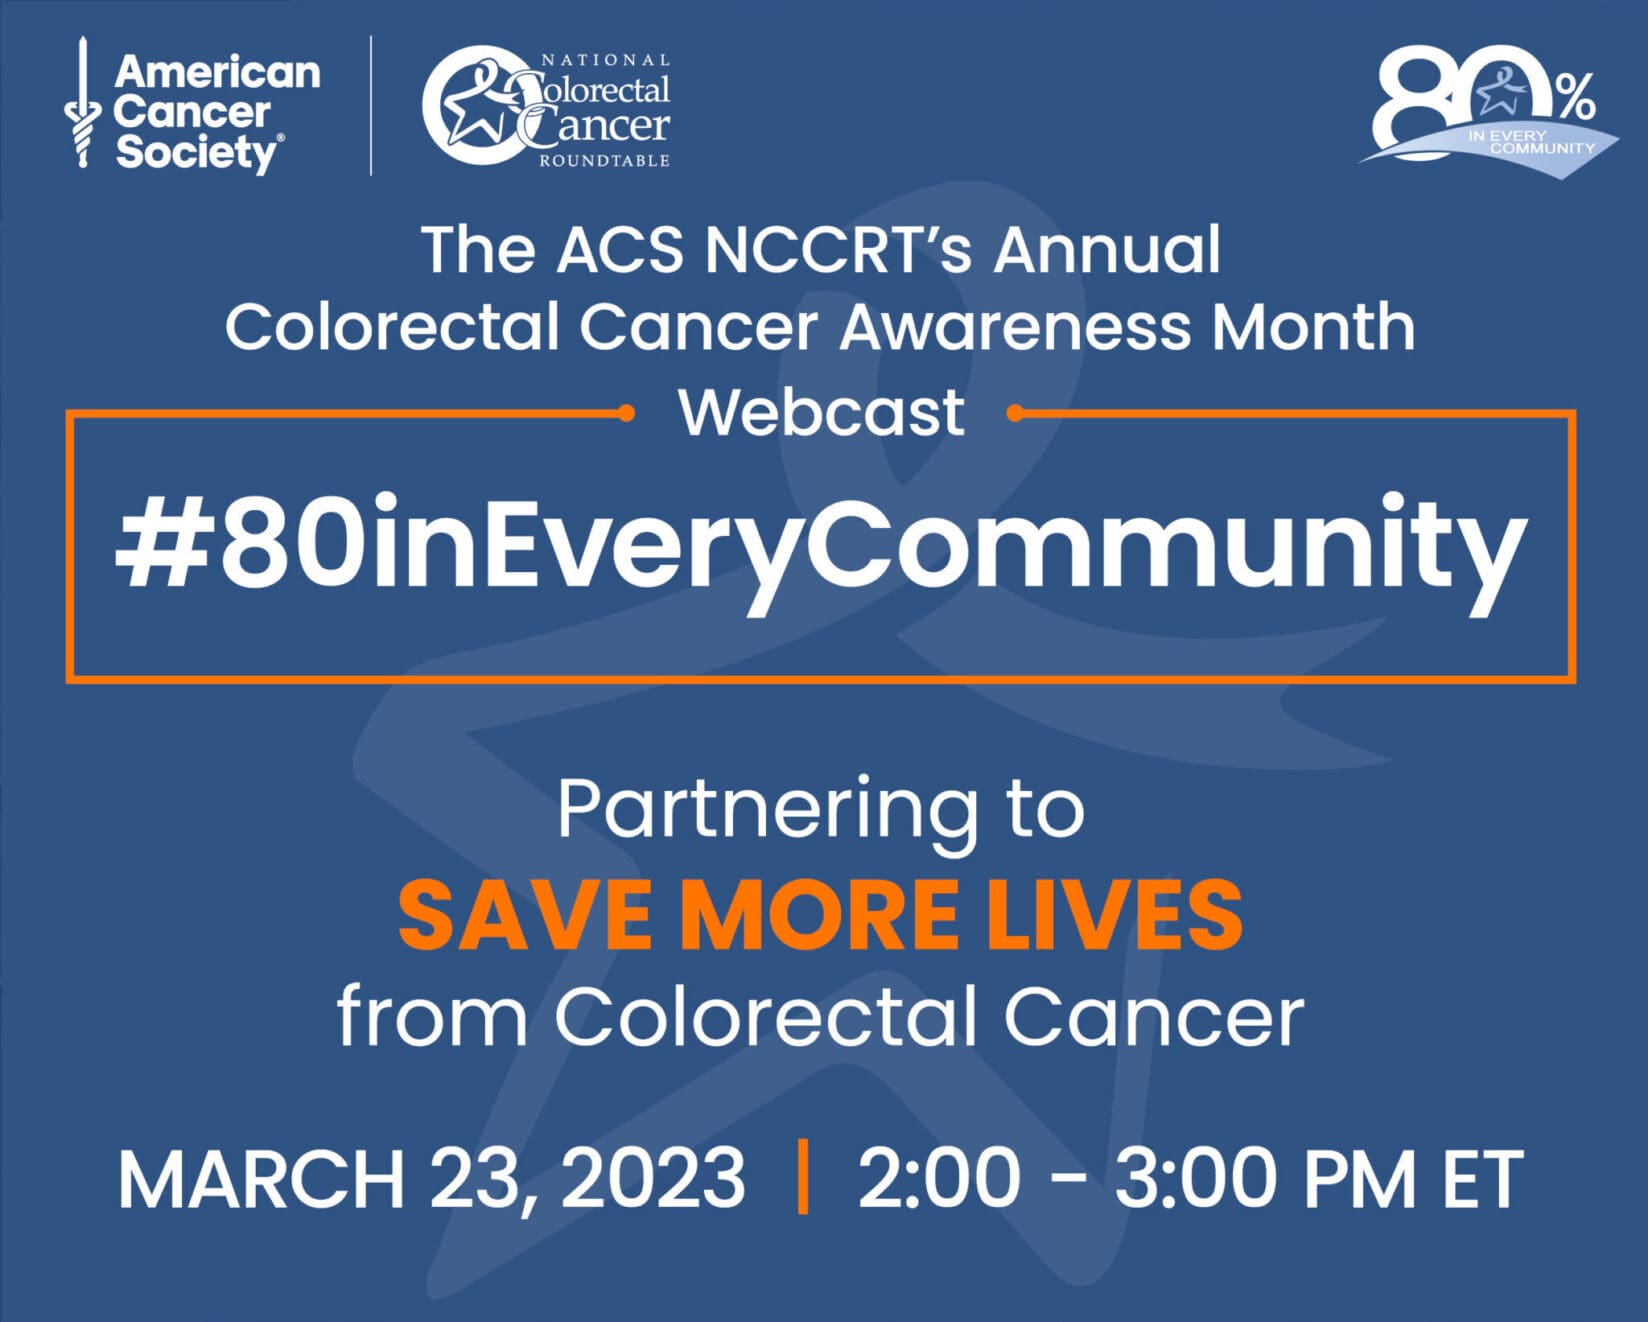 Image for March 2023 Colorectal Cancer Awareness Month Webcast